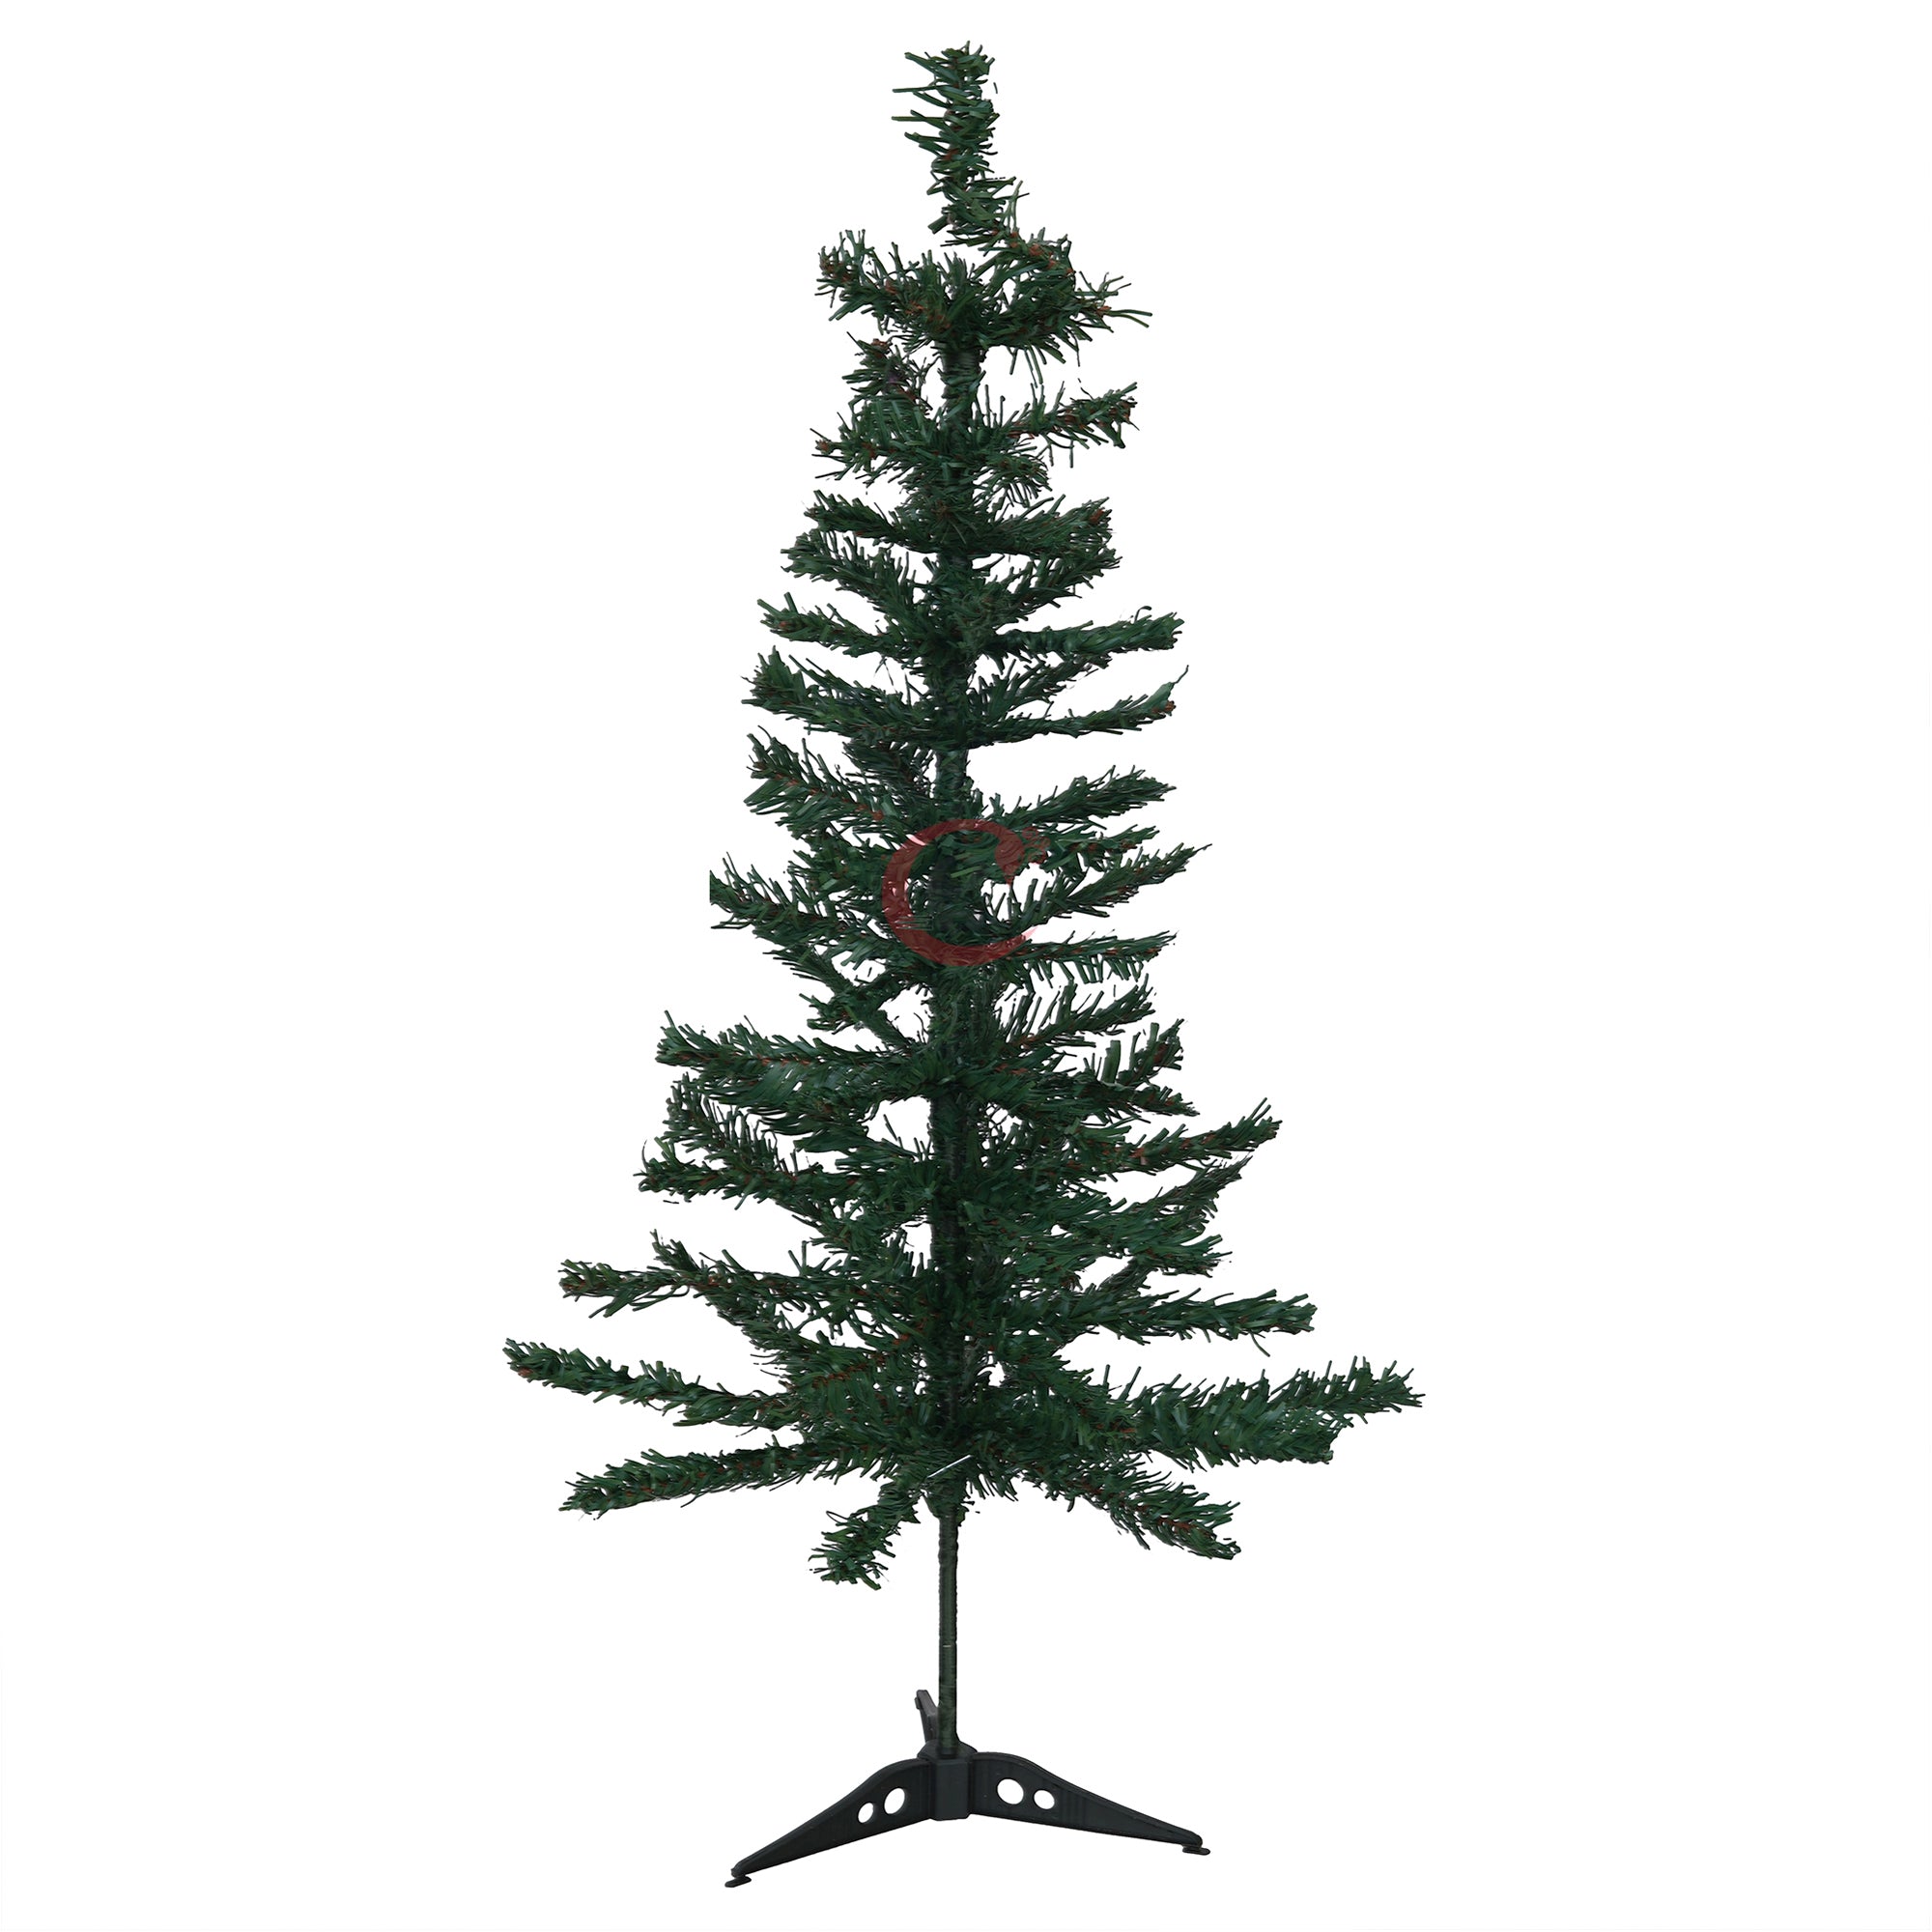 eCraftIndia 3 Feet Green Artificial Christmas Tree Xmas Pine Tree with Metal Stand - Xmas Tree for Indoor, Outdoor, Home, Living Room, Office, Church Decor - Merry Christmas Decoration Item 2